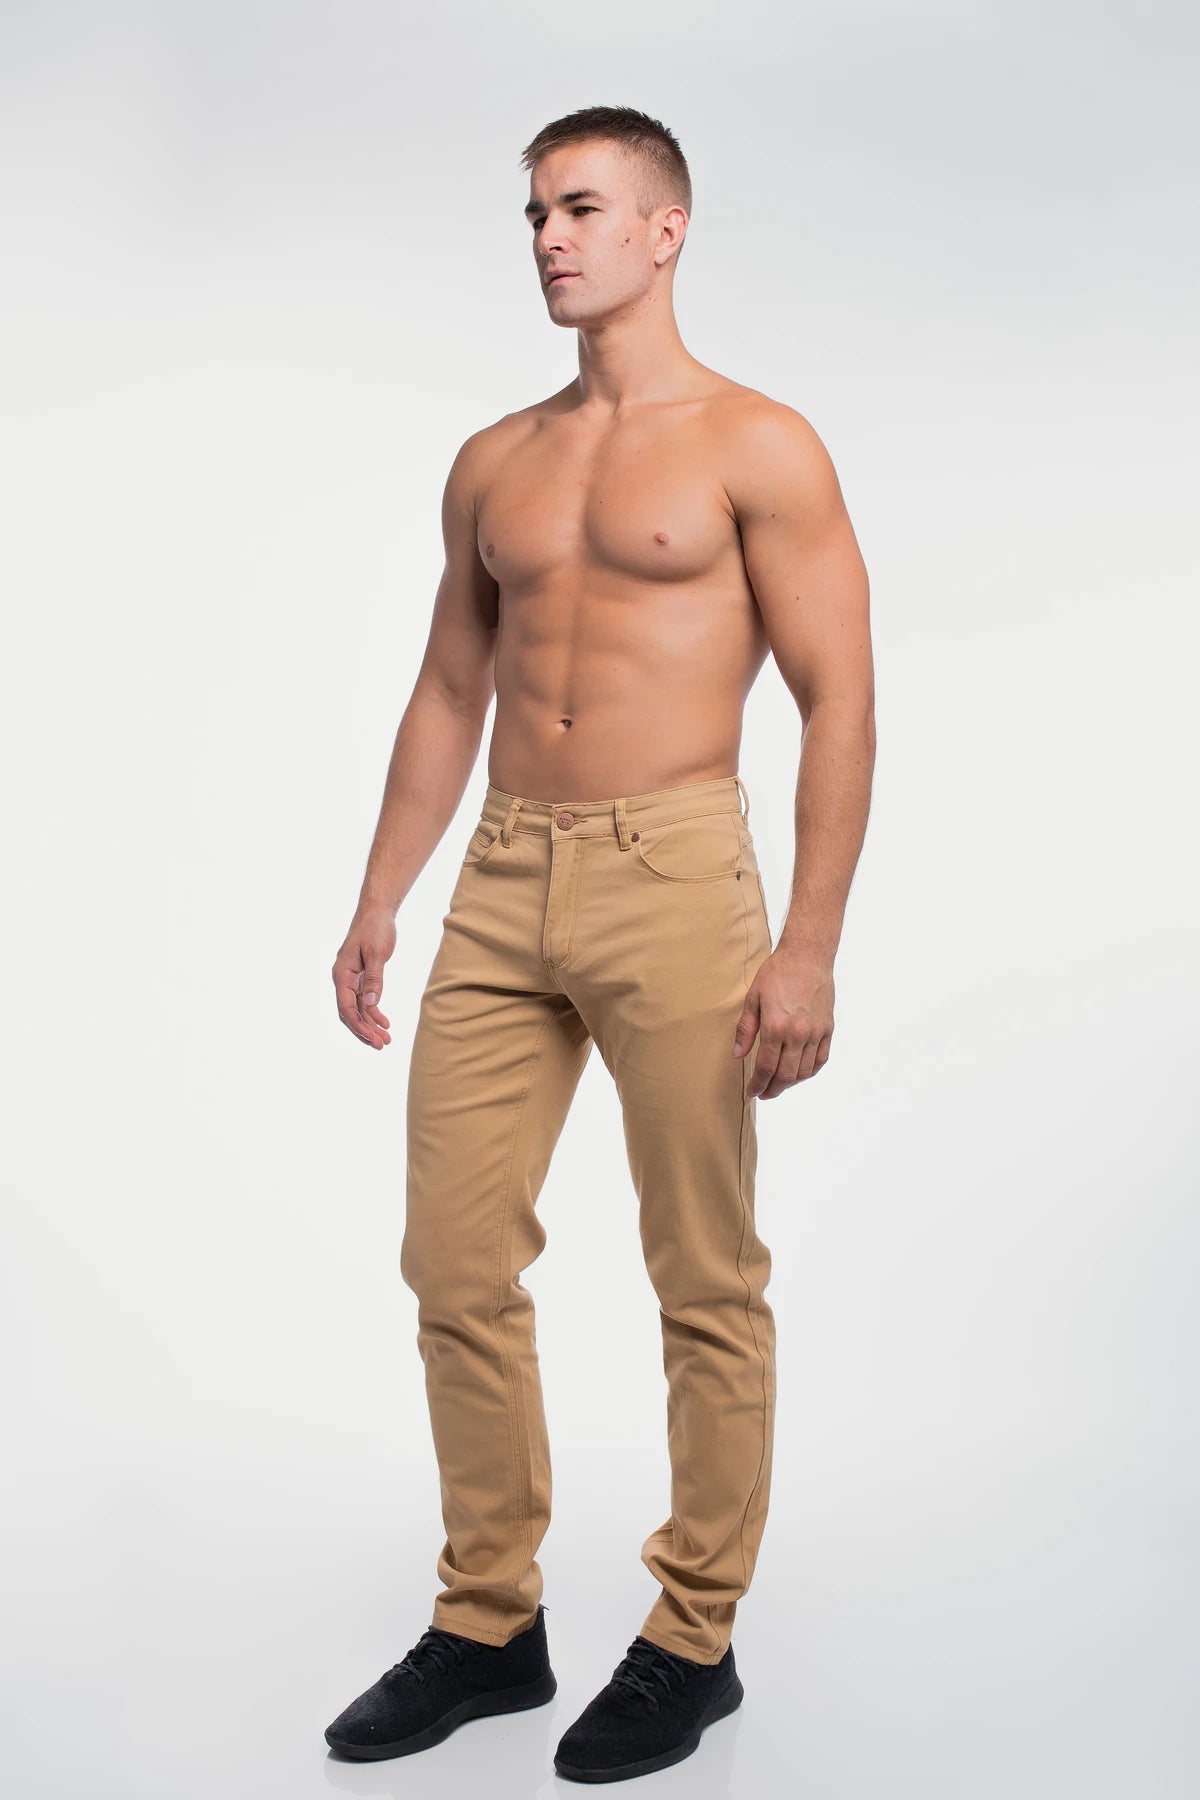 Shop Athletic Fit Chino Pants for Men